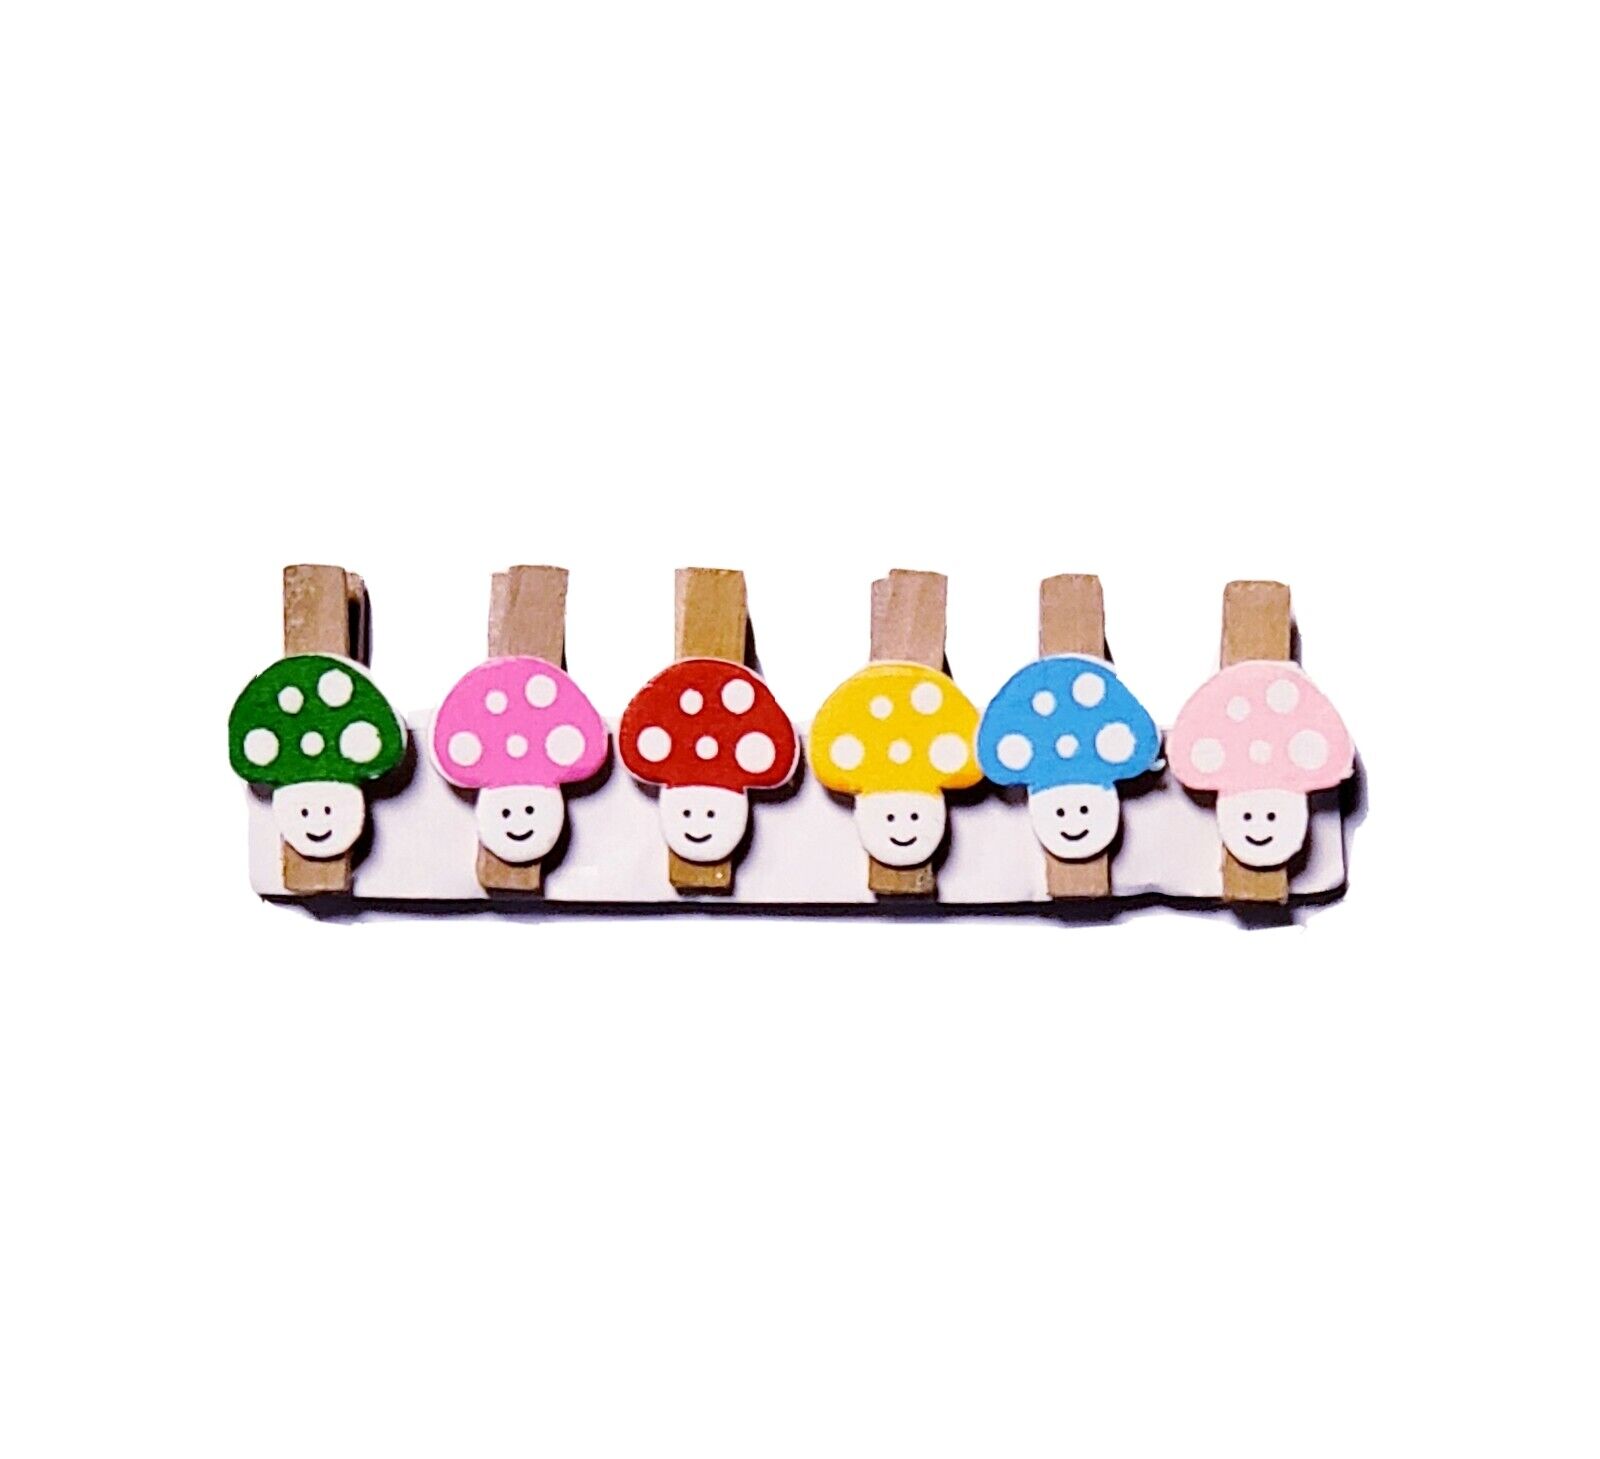 Pack Of 6 Multicolored Cute Mini Mushroom Clothespins For Photos And Decor